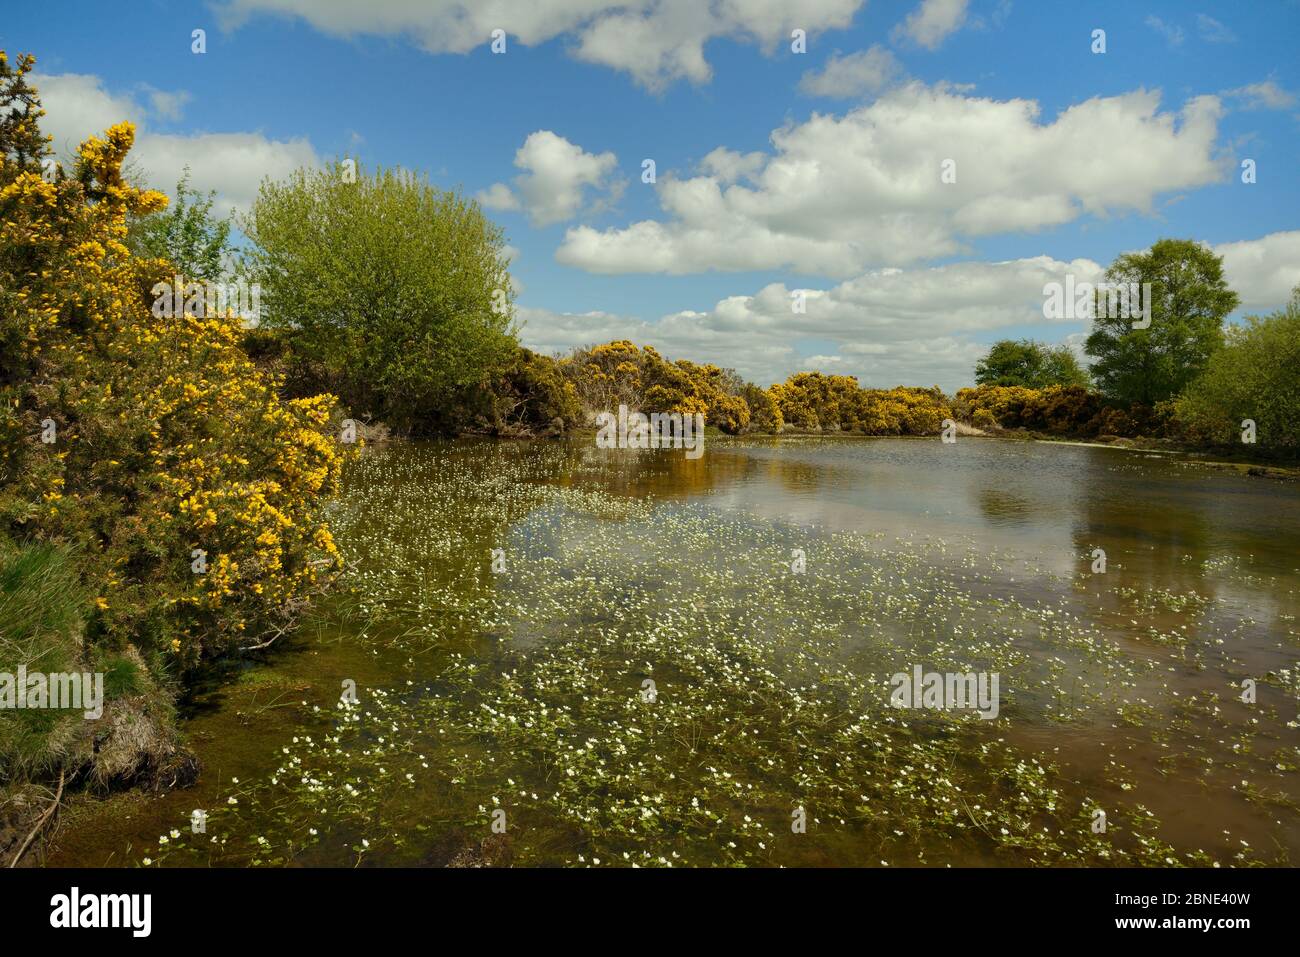 Common gorse bushes (Ulex europaeus) fringing a pond with a mass of flowering Common water-crowfoot (Ranunculus aquatilis), Brecon Beacons National Pa Stock Photo